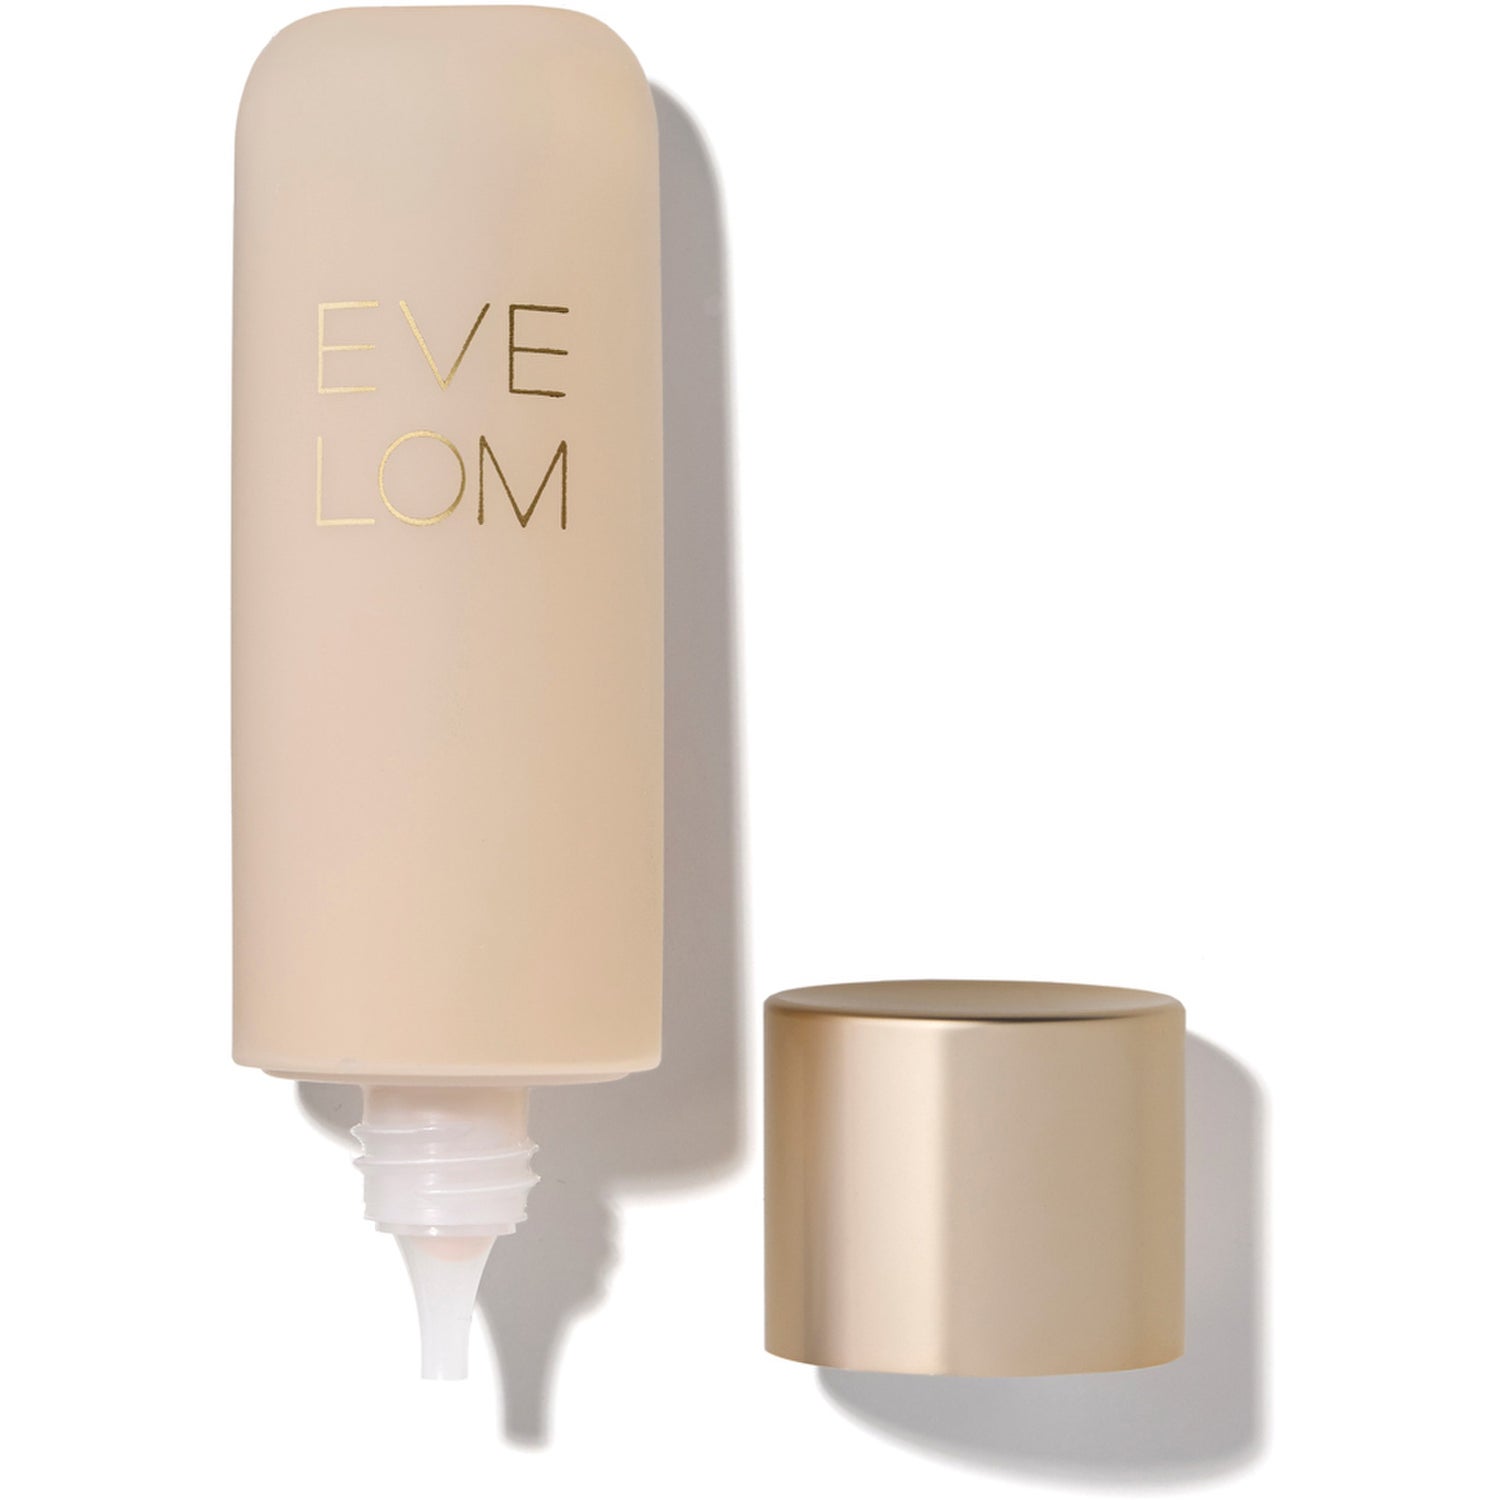 Eve Lom Sheer Radiance Oil-Free Foundation SPF20, Free Shipping